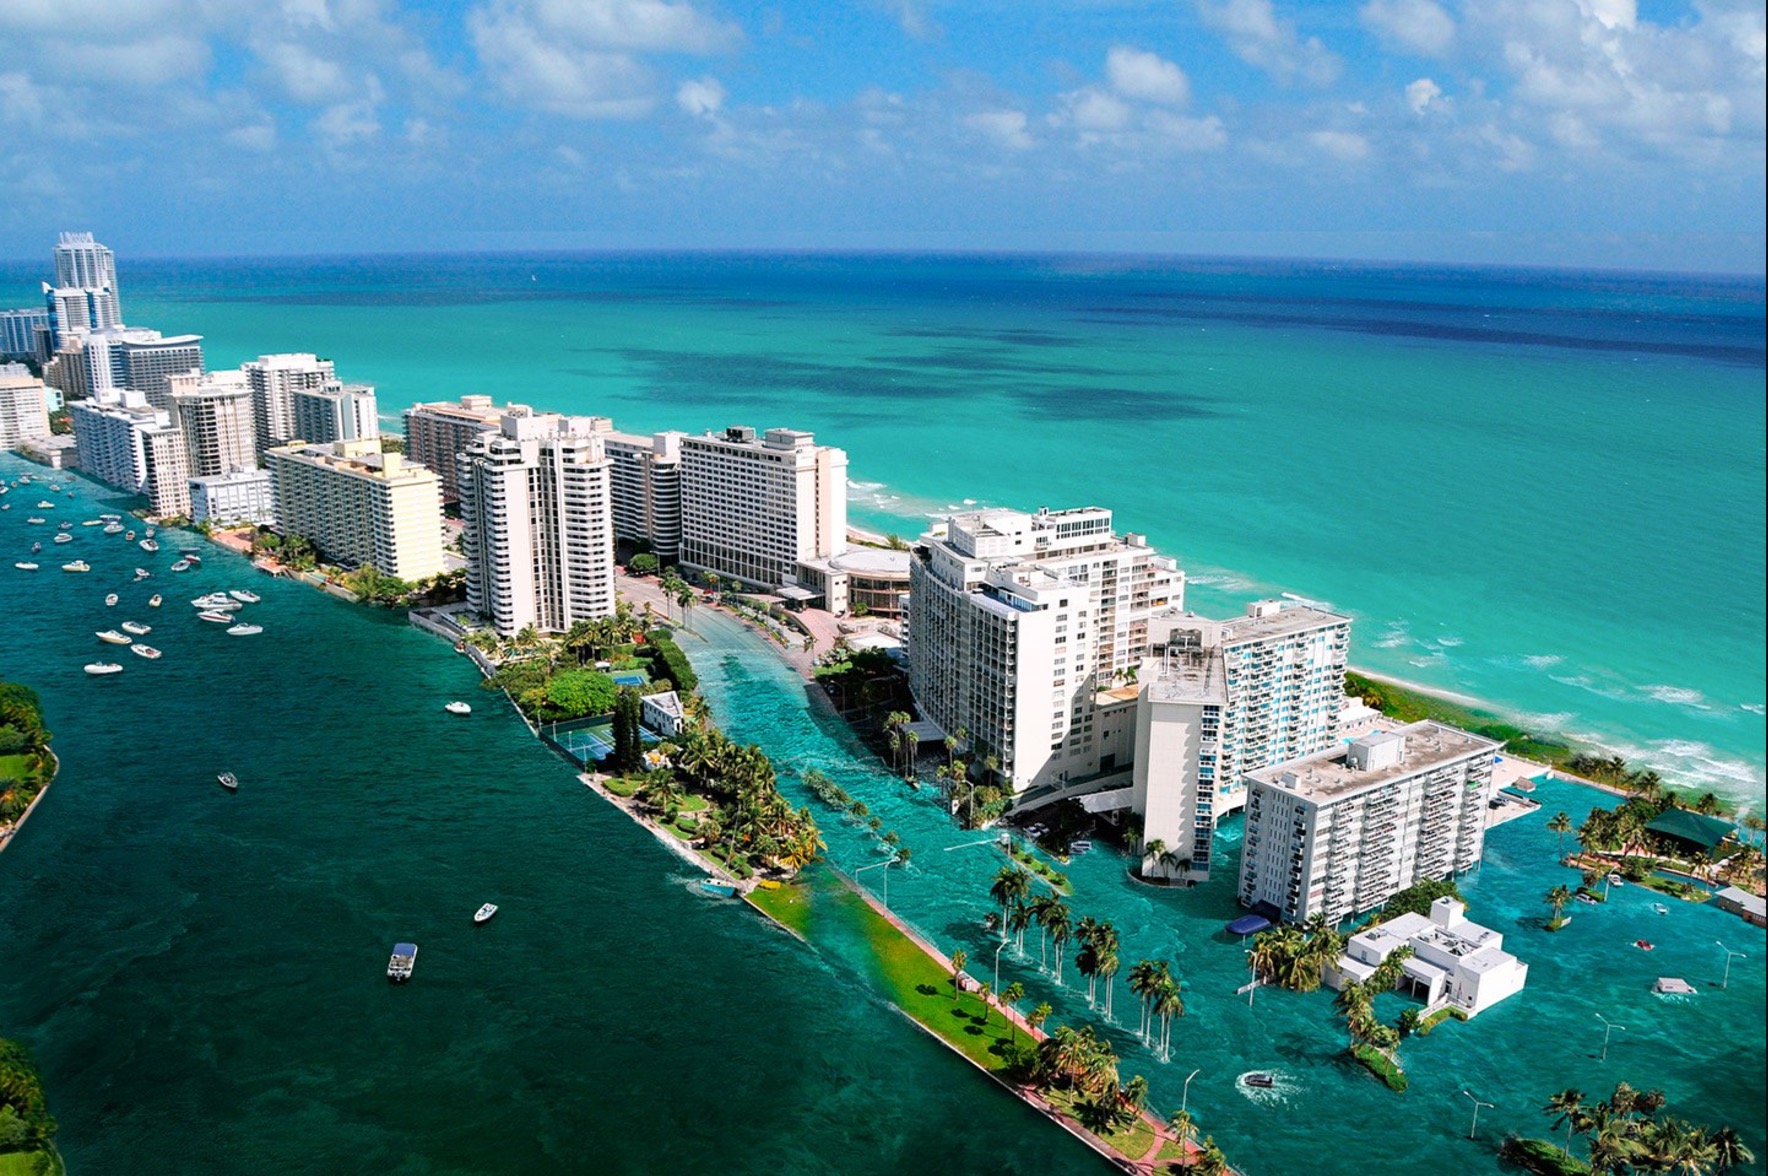 Now You Can Find Beautiful Miami Beach Apartments for Sale – Cheaper/Faster